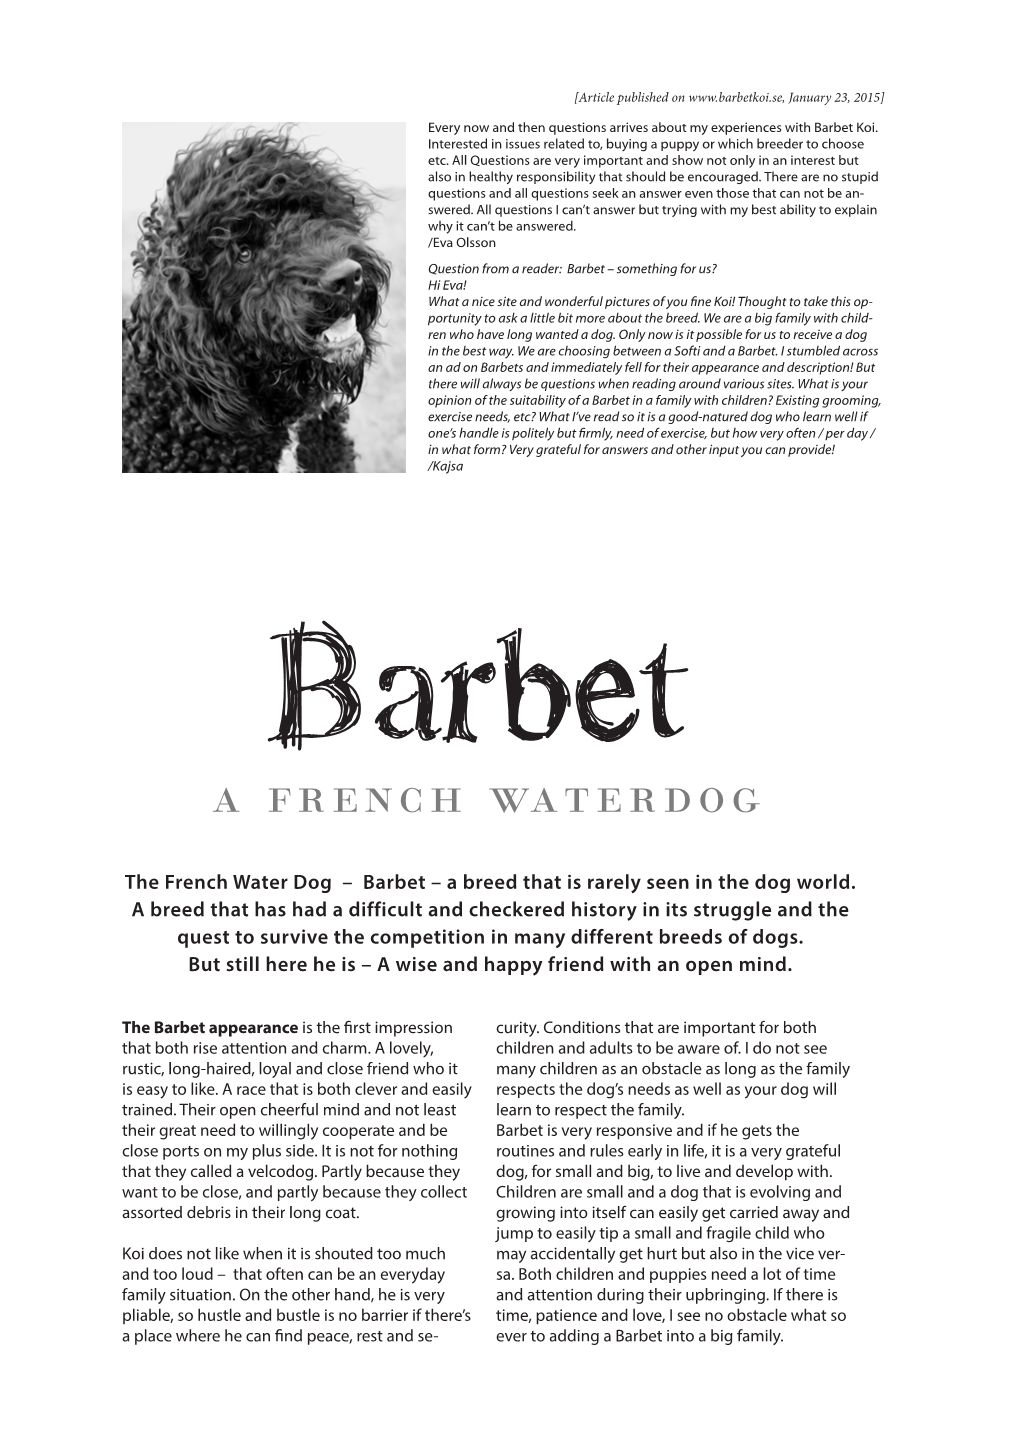 The French Water Dog – Barbet – a Breed That Is Rarely Seen in the Dog World